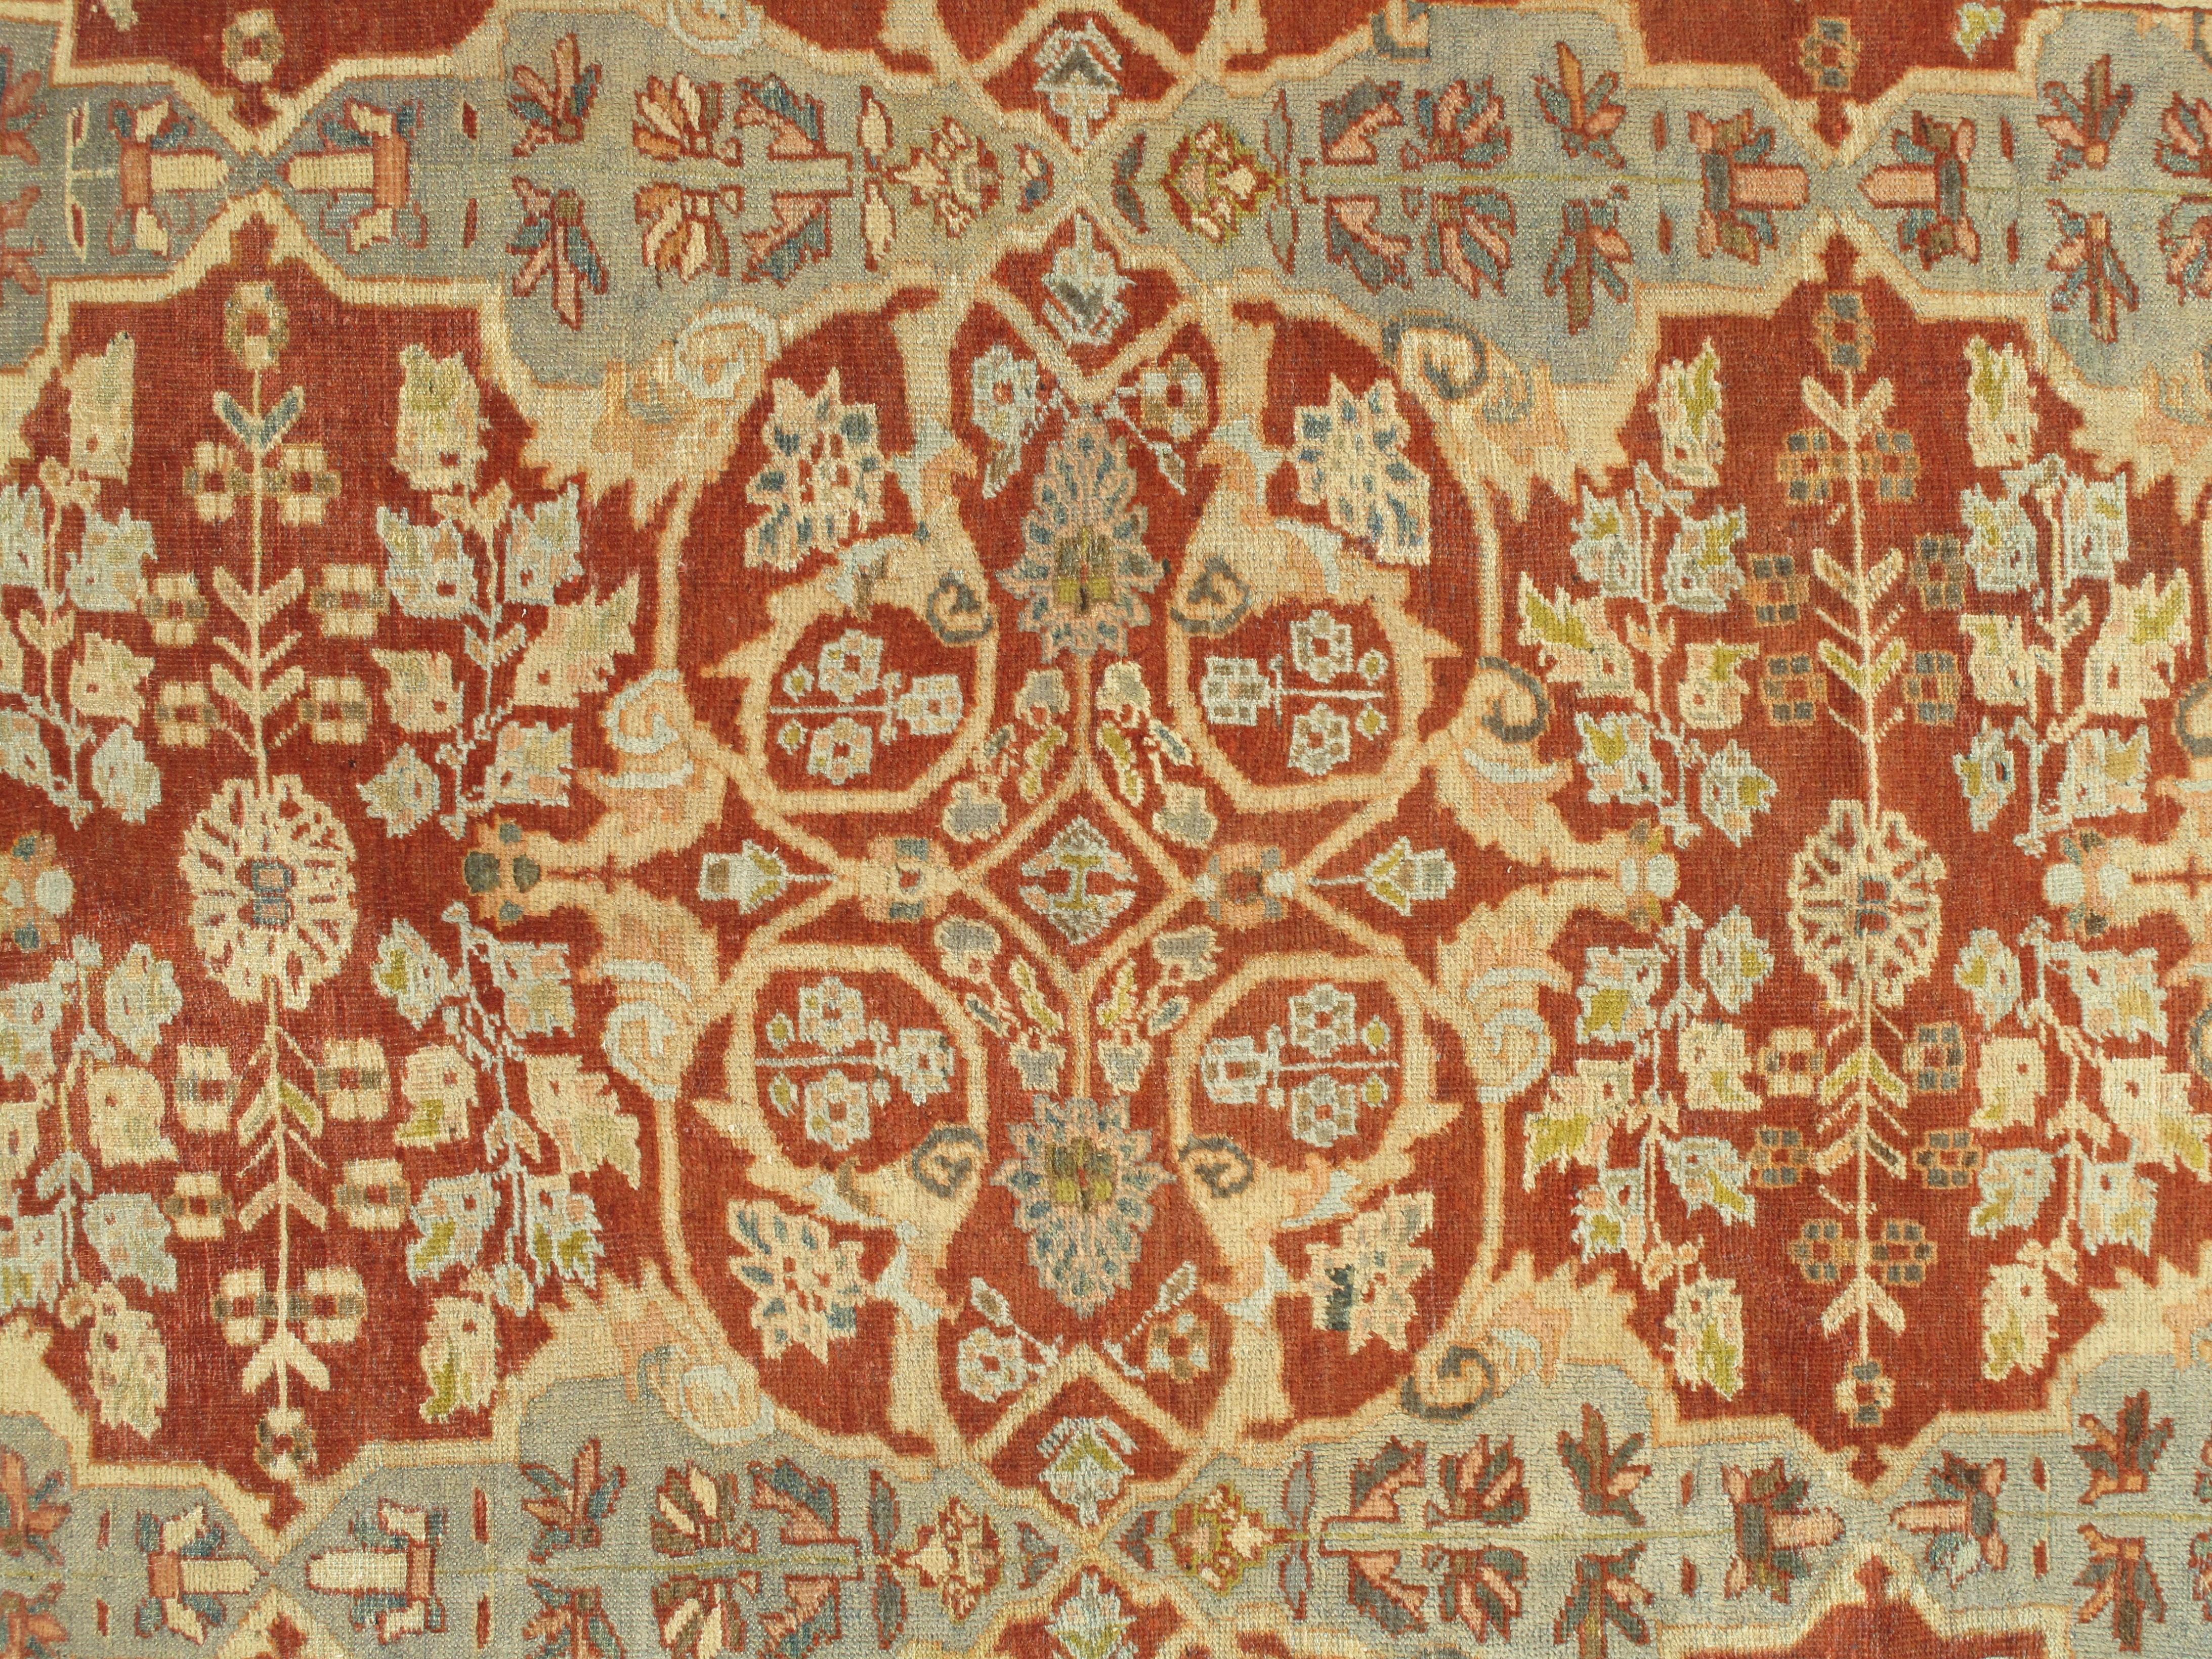 Mahal is a region in NW Persia. Mahal's just like Sultanabad’s are famous for their floral designs as they improved the quality and designs to match the European taste. Adapting the traditional patterns for use in European and American homes.